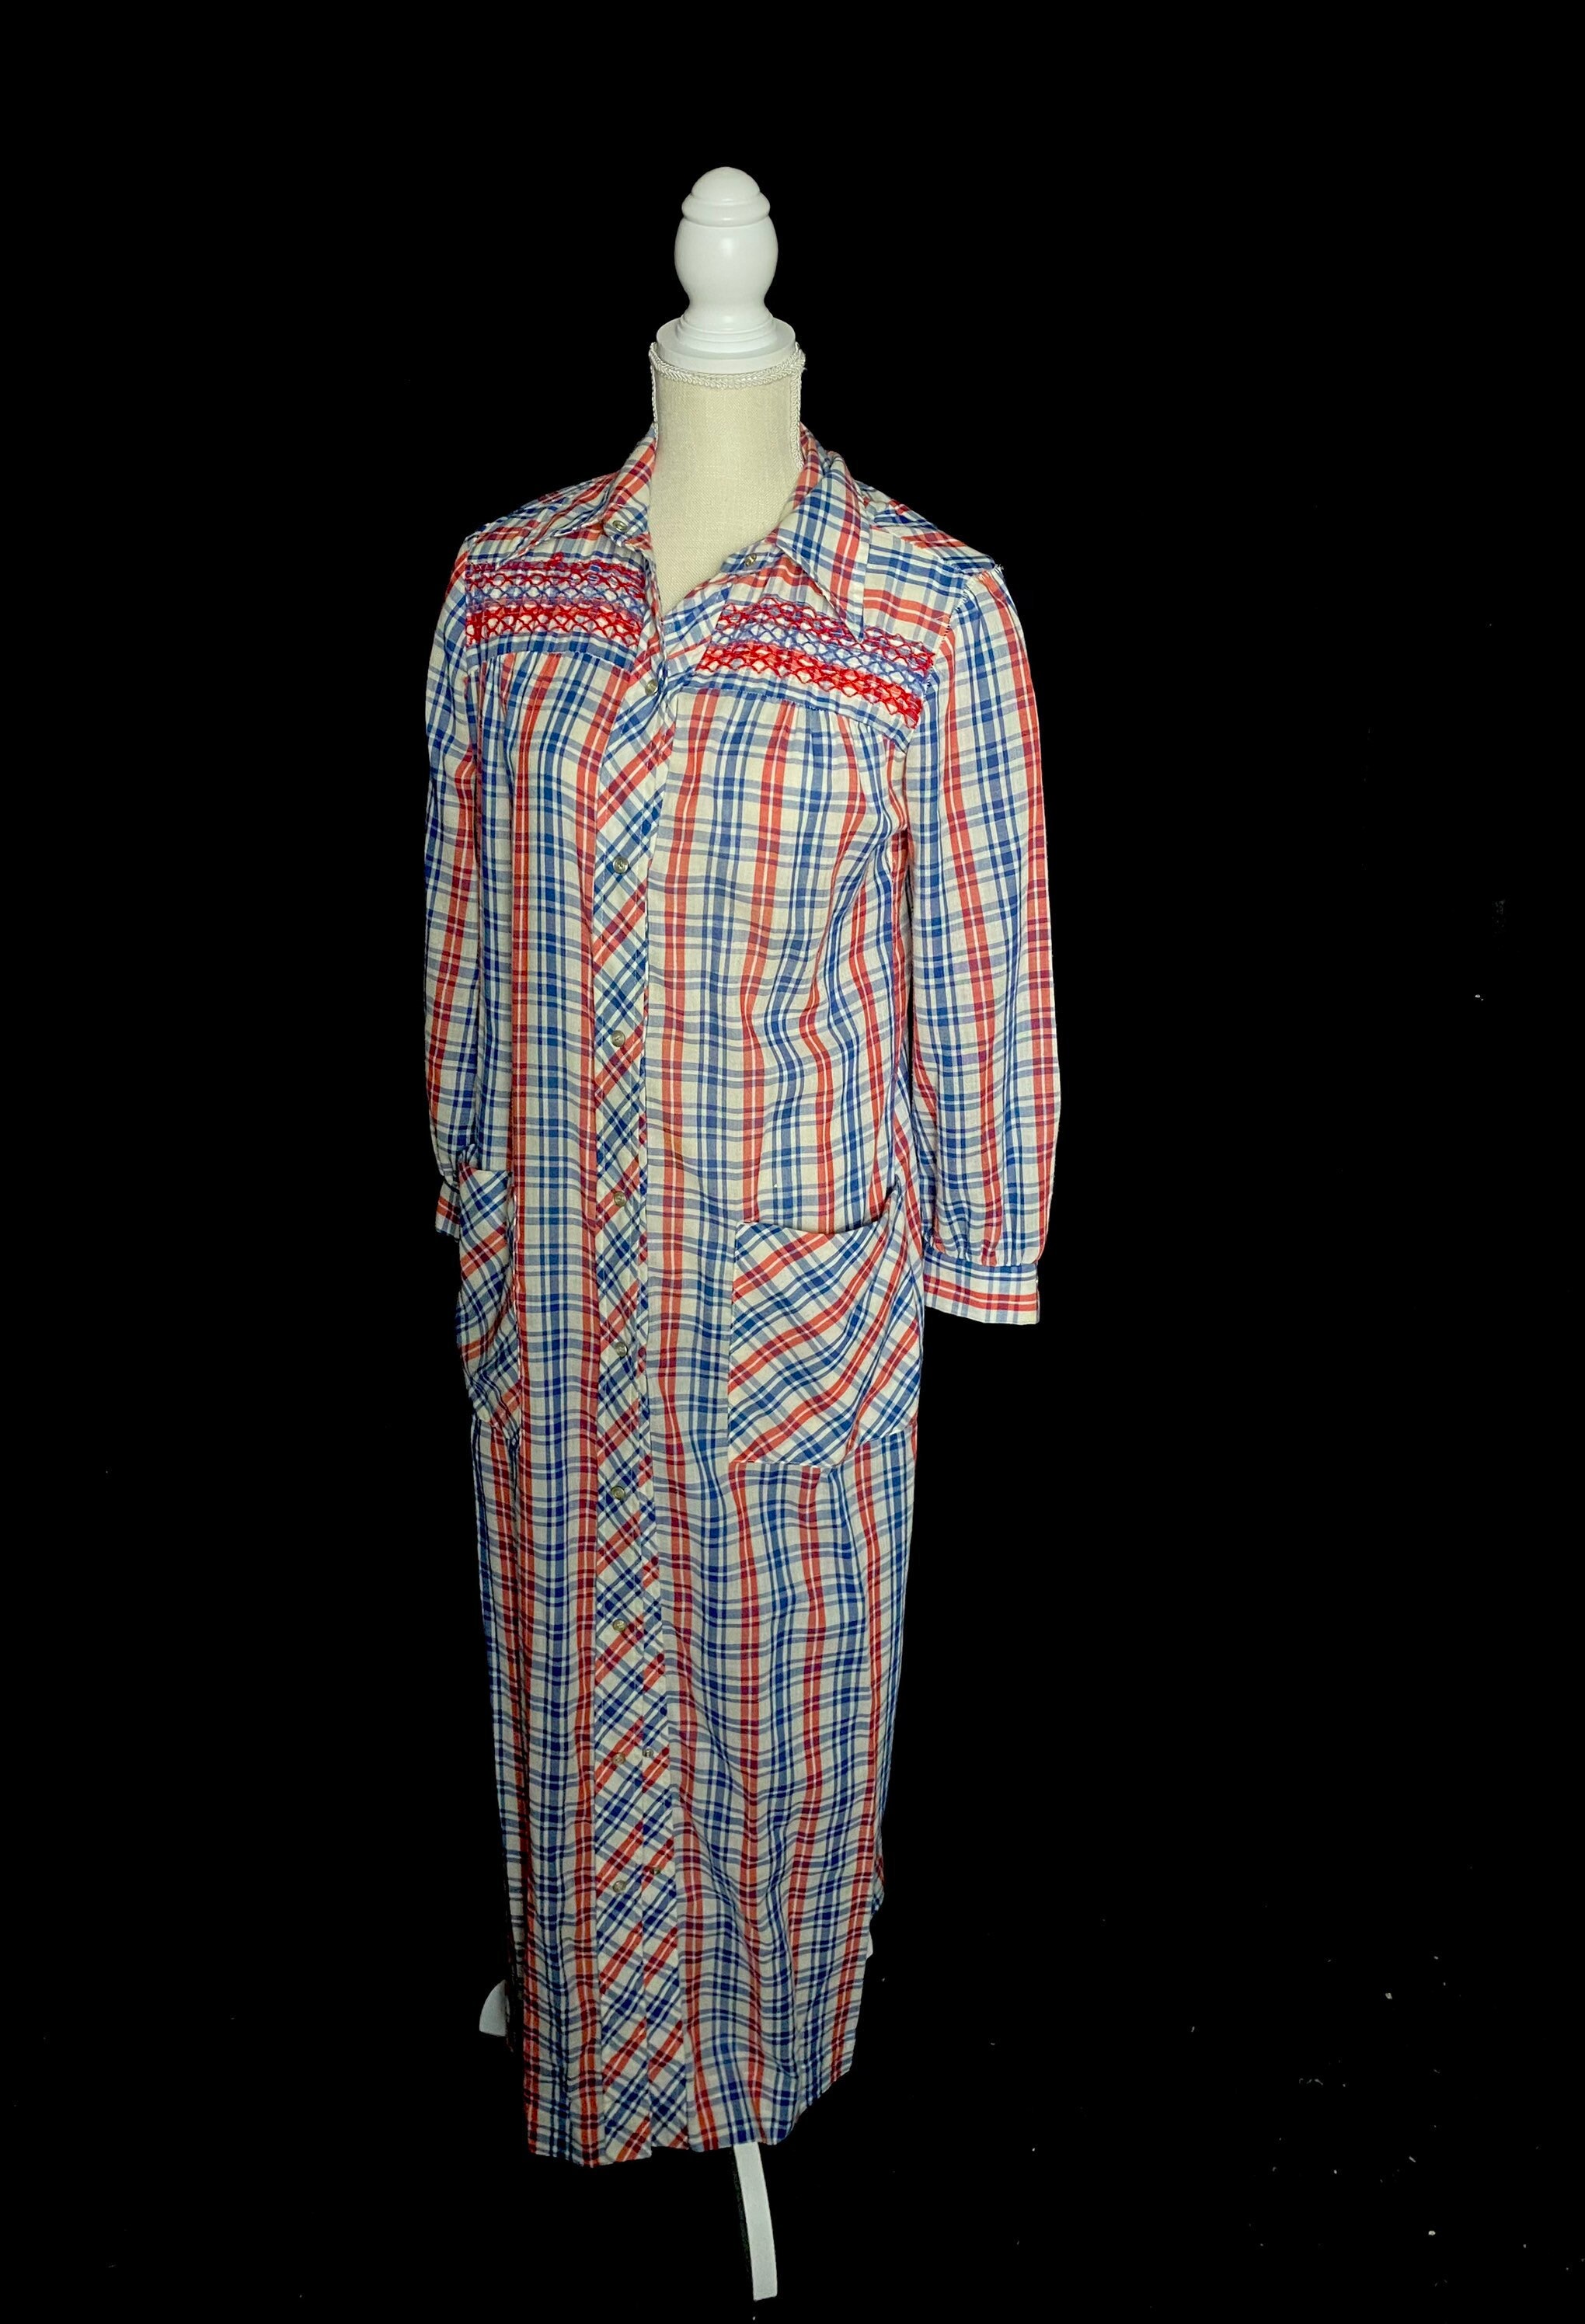 1960s Coats and Jackets Vintage 1960s Red White  Blue Plaid House Coat, Pearl Snap Dress Size Medium $55.00 AT vintagedancer.com